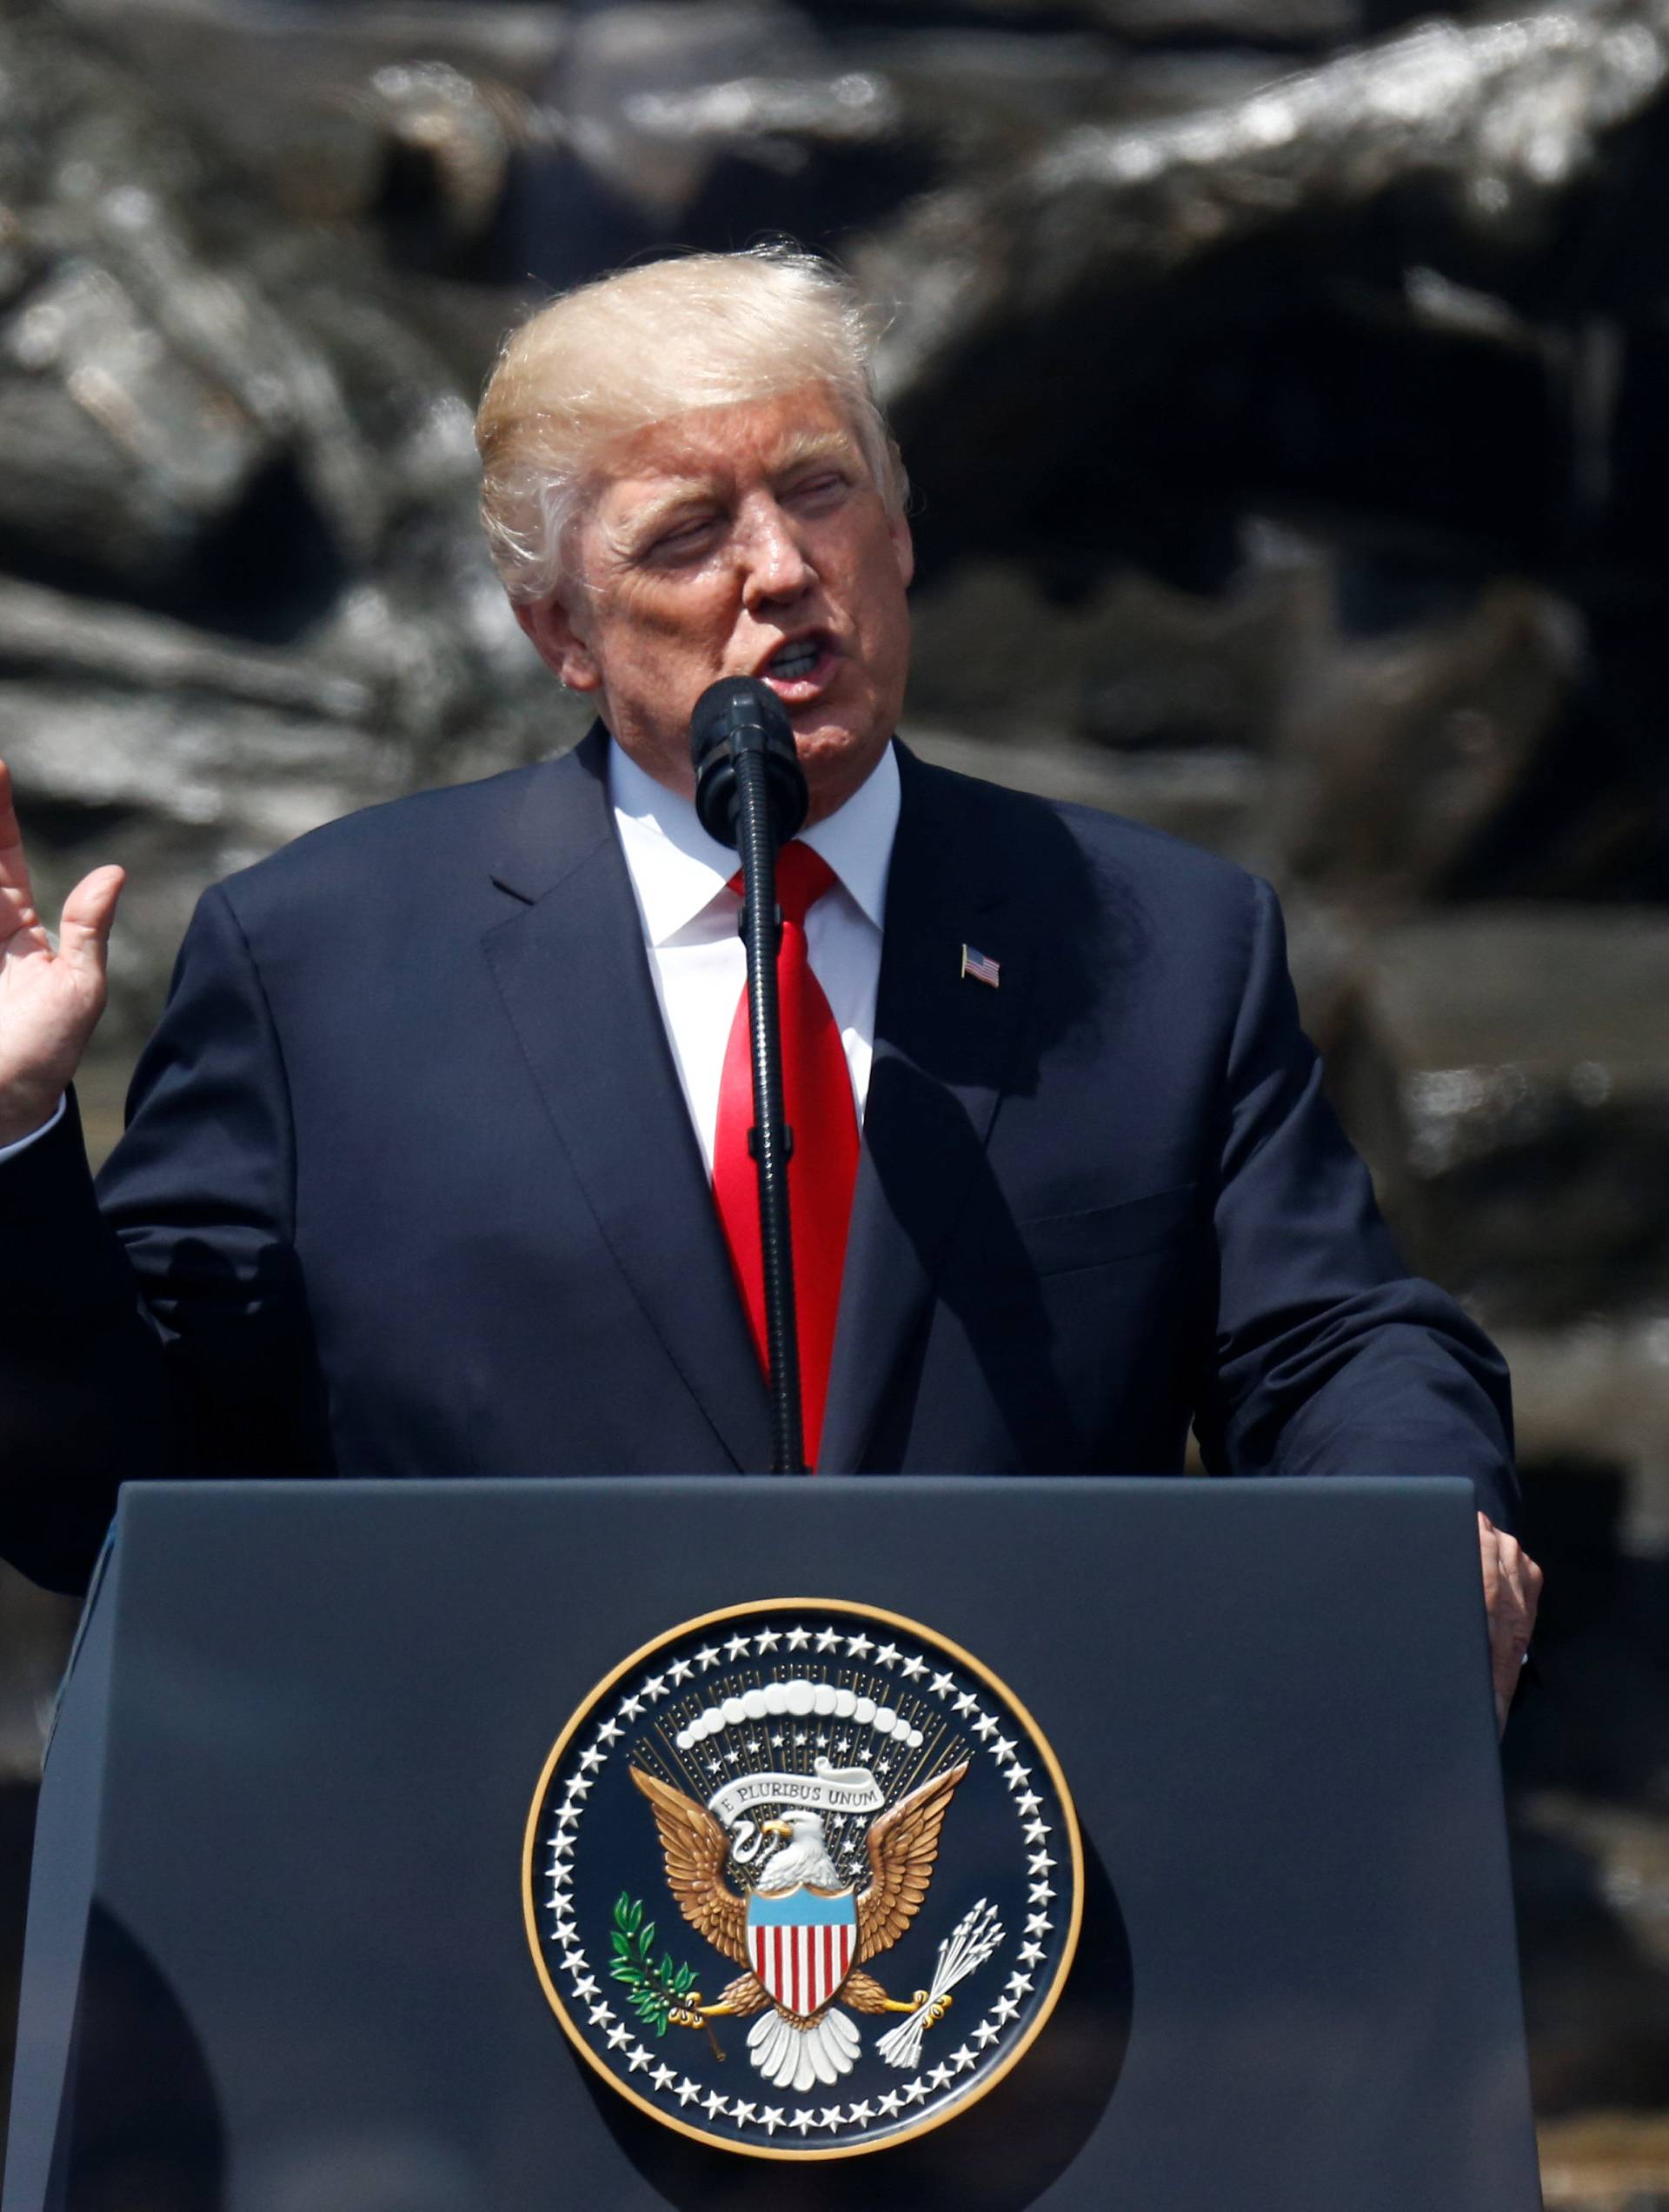 U.S. President Donald Trump gives a public speech in front of the Warsaw Uprising Monument at Krasinski Square, in Warsaw, Poland